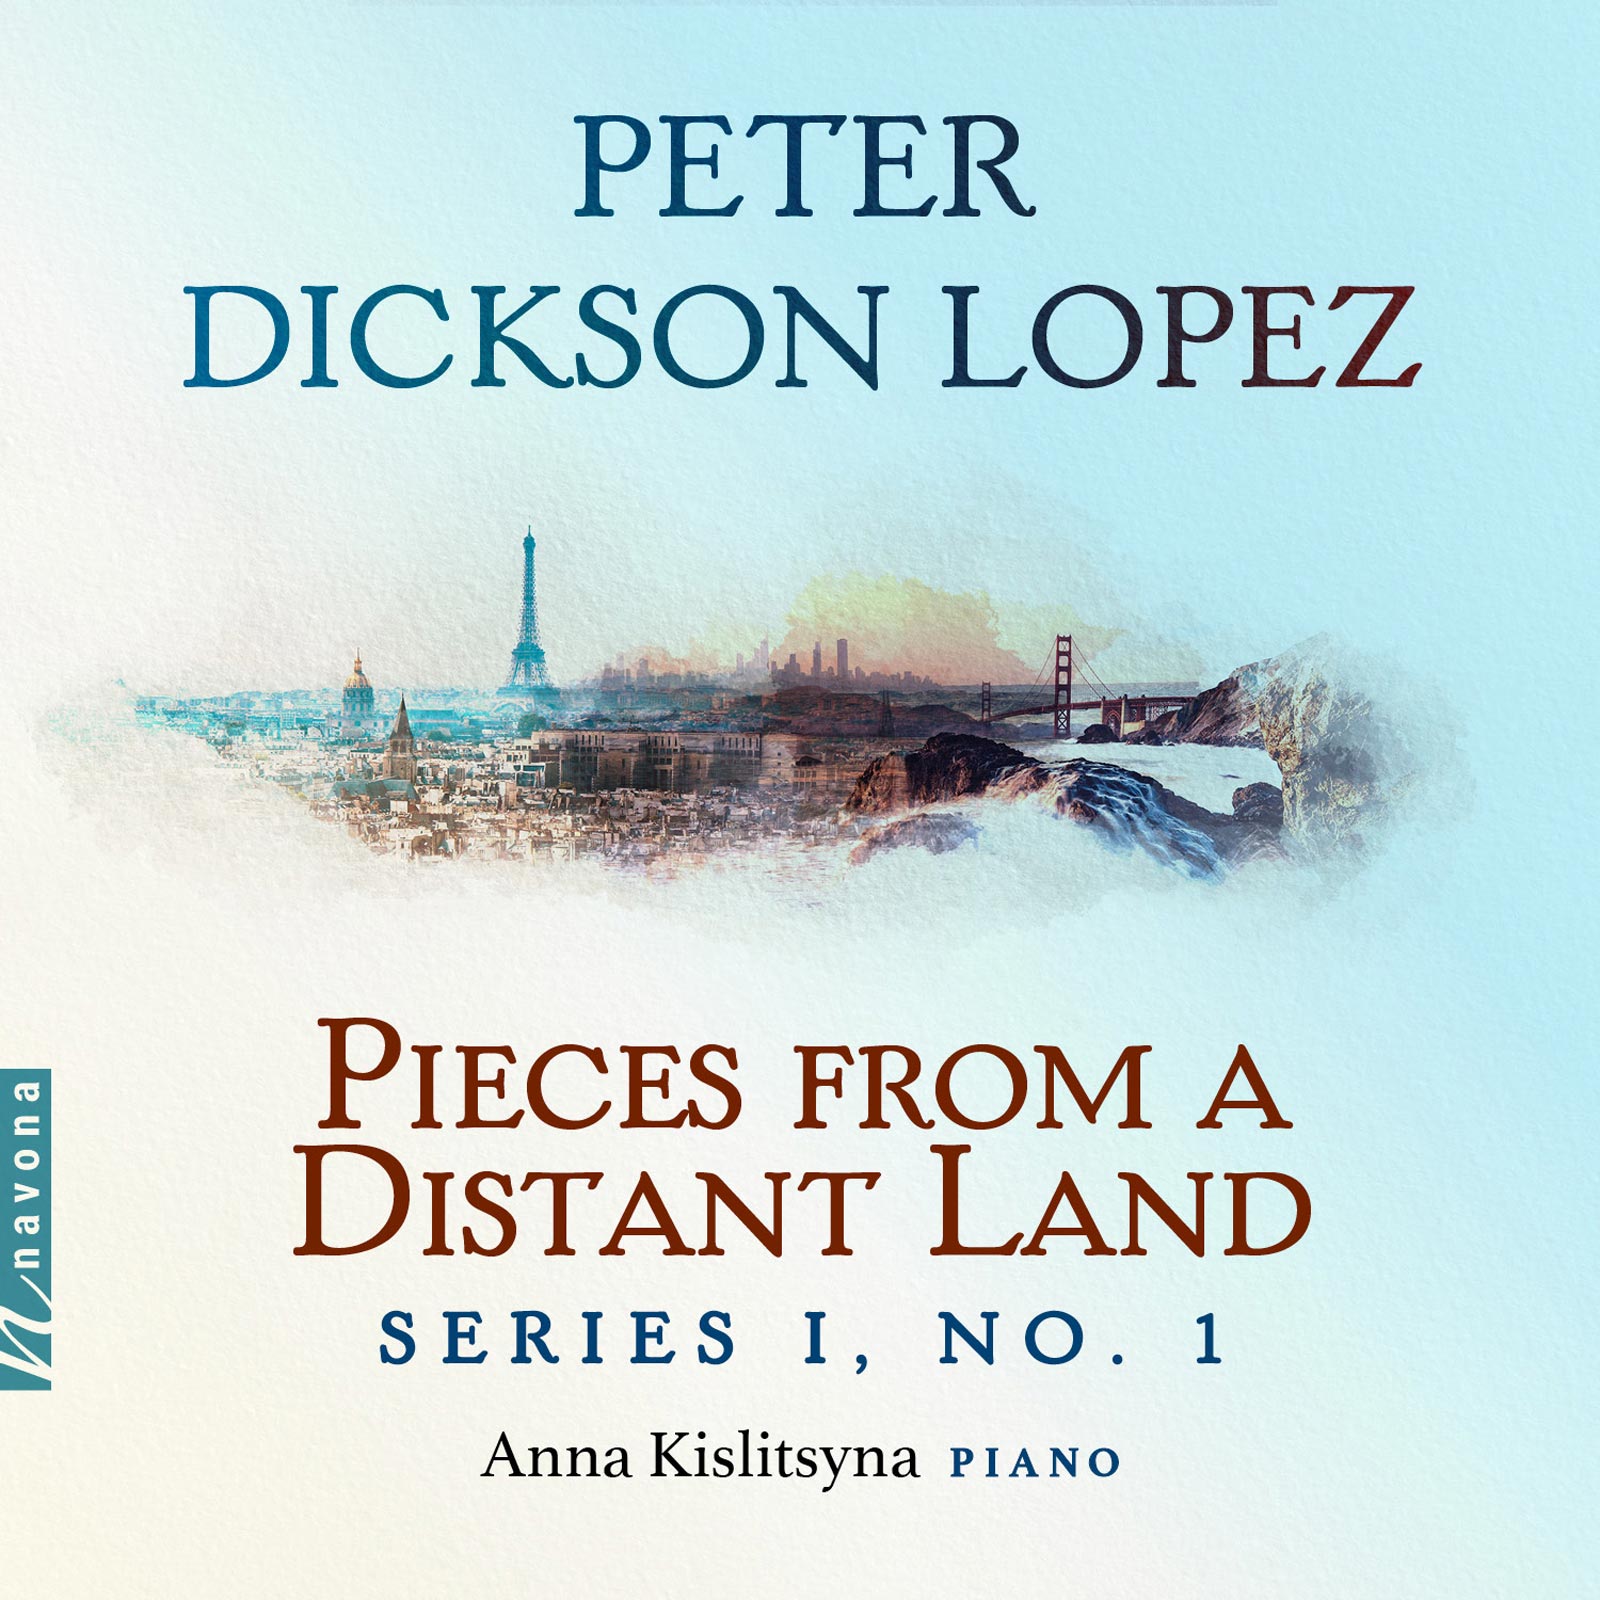 PIECES FROM A DISTANT LAND